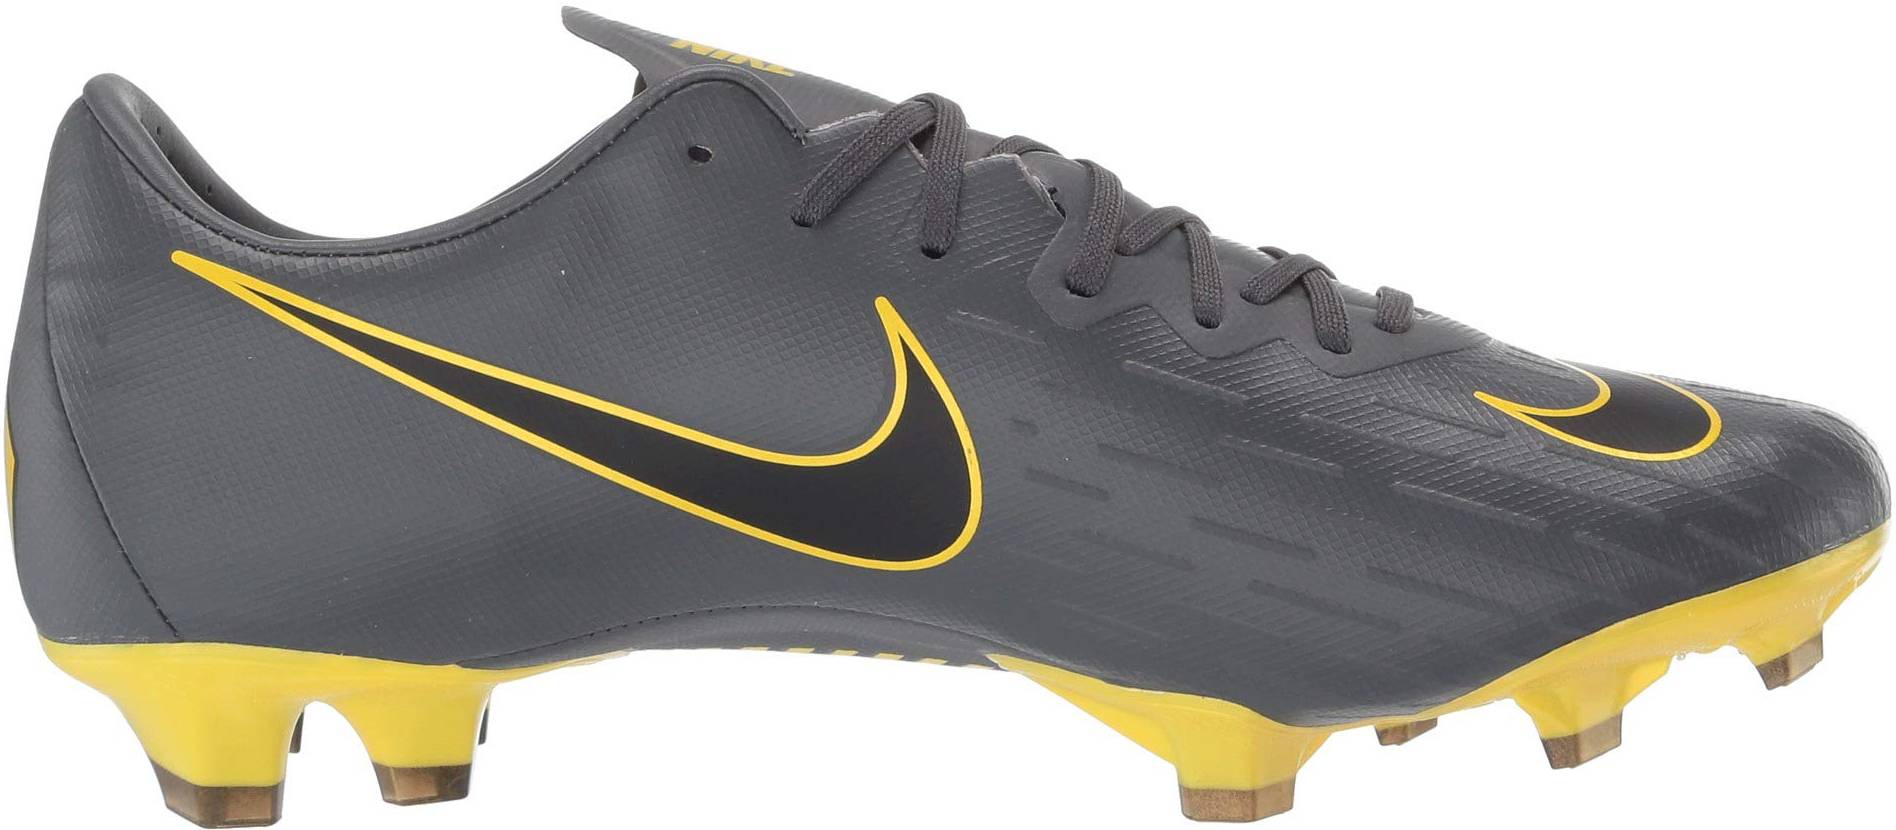 cr7 cleats 215